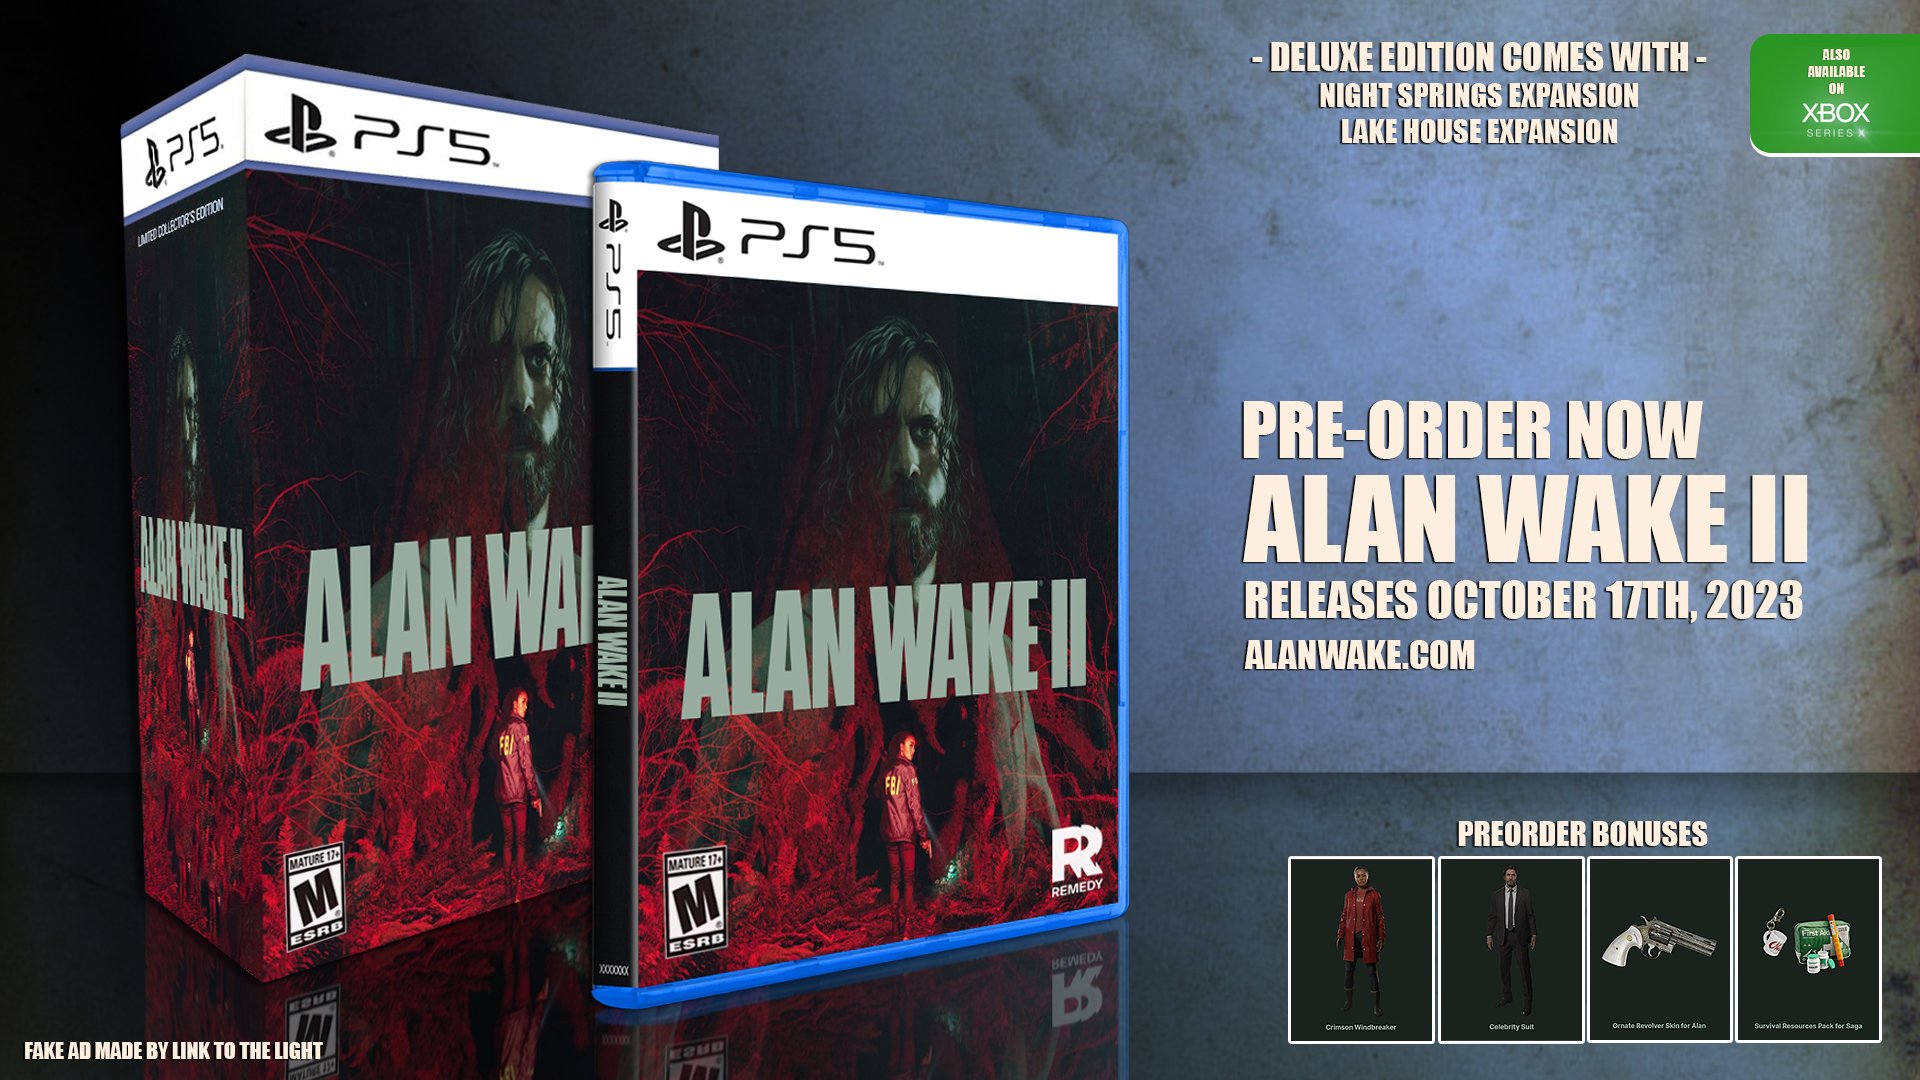 Link to the Light 🔦 on X: I'm happy to announce the physical Standard and  Limited Collectors Editions of Alan Wake 2! Pre-order now at your local bed  while you're dreaming. Releasing